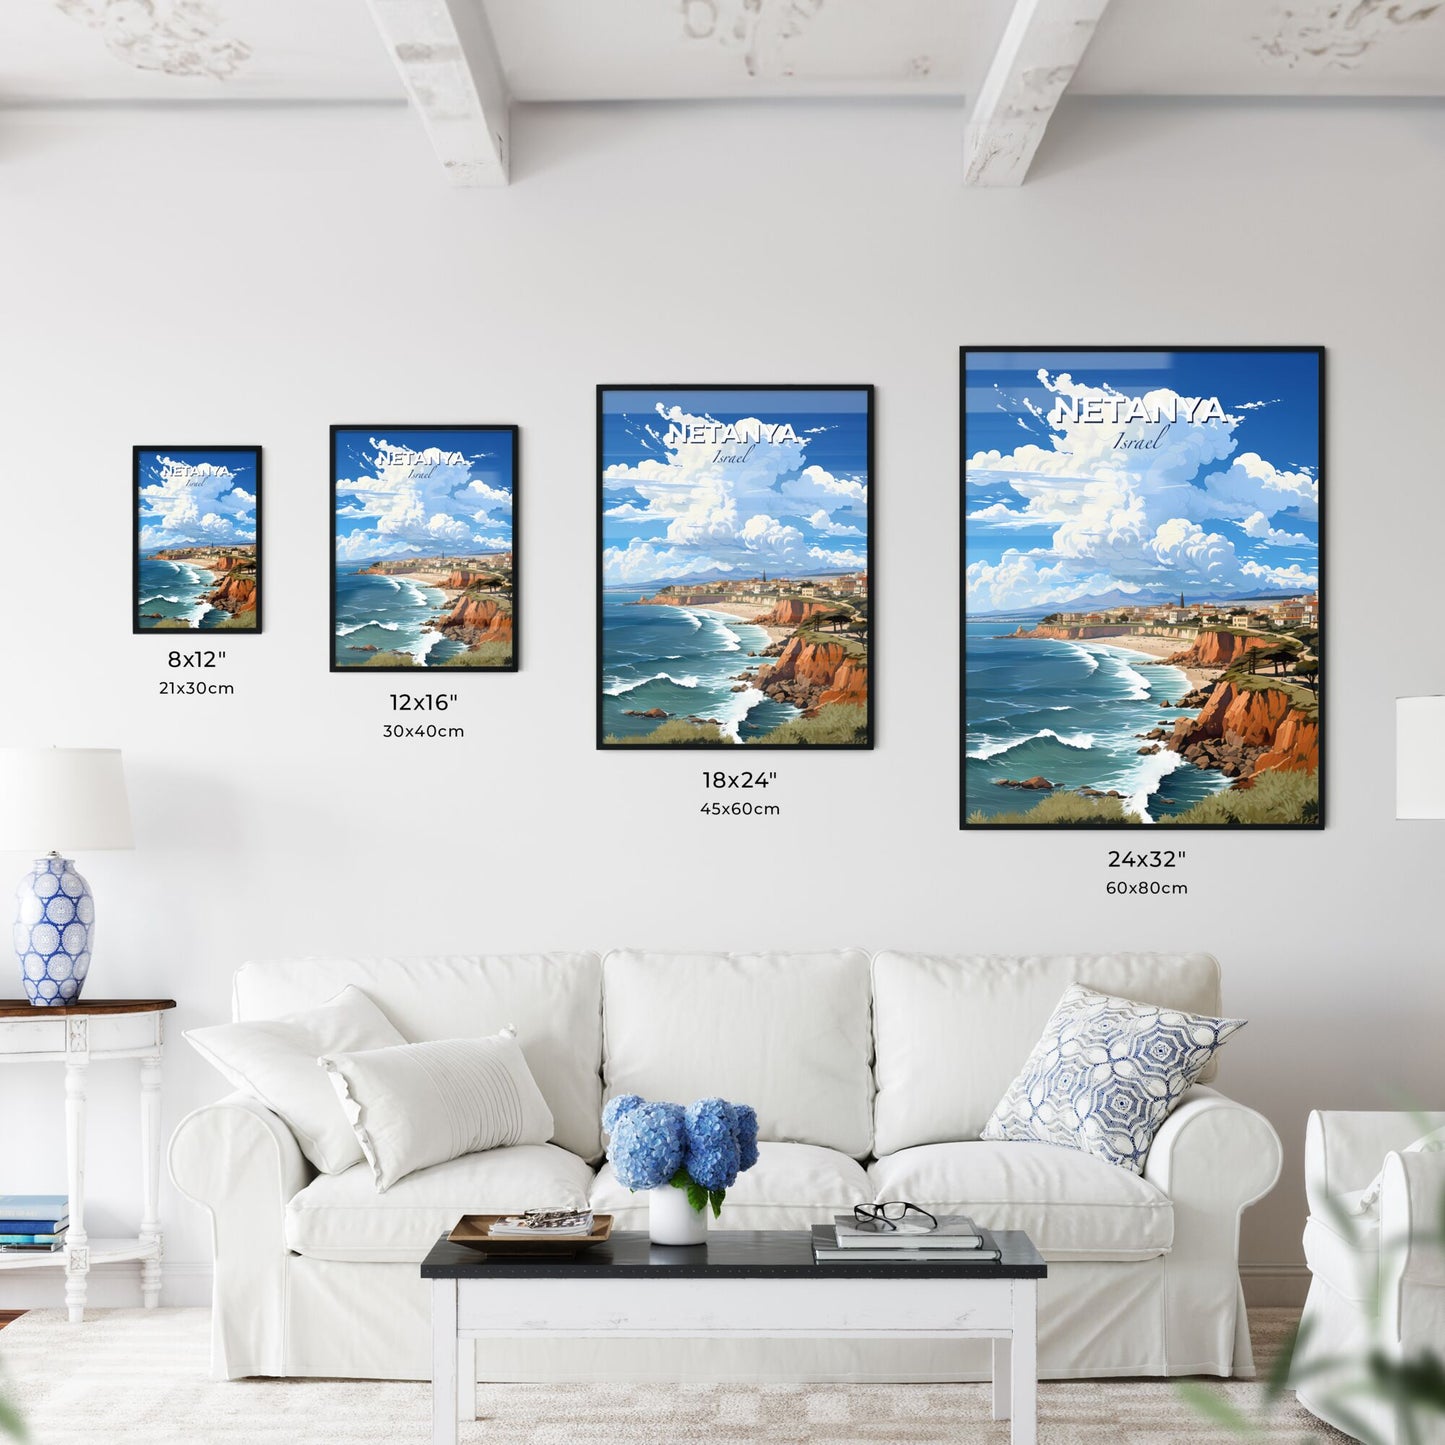 Vibrant Acrylic Painting of Netanya Israel Skyline Depicting a Picturesque Beach and Town Juxtaposition Default Title